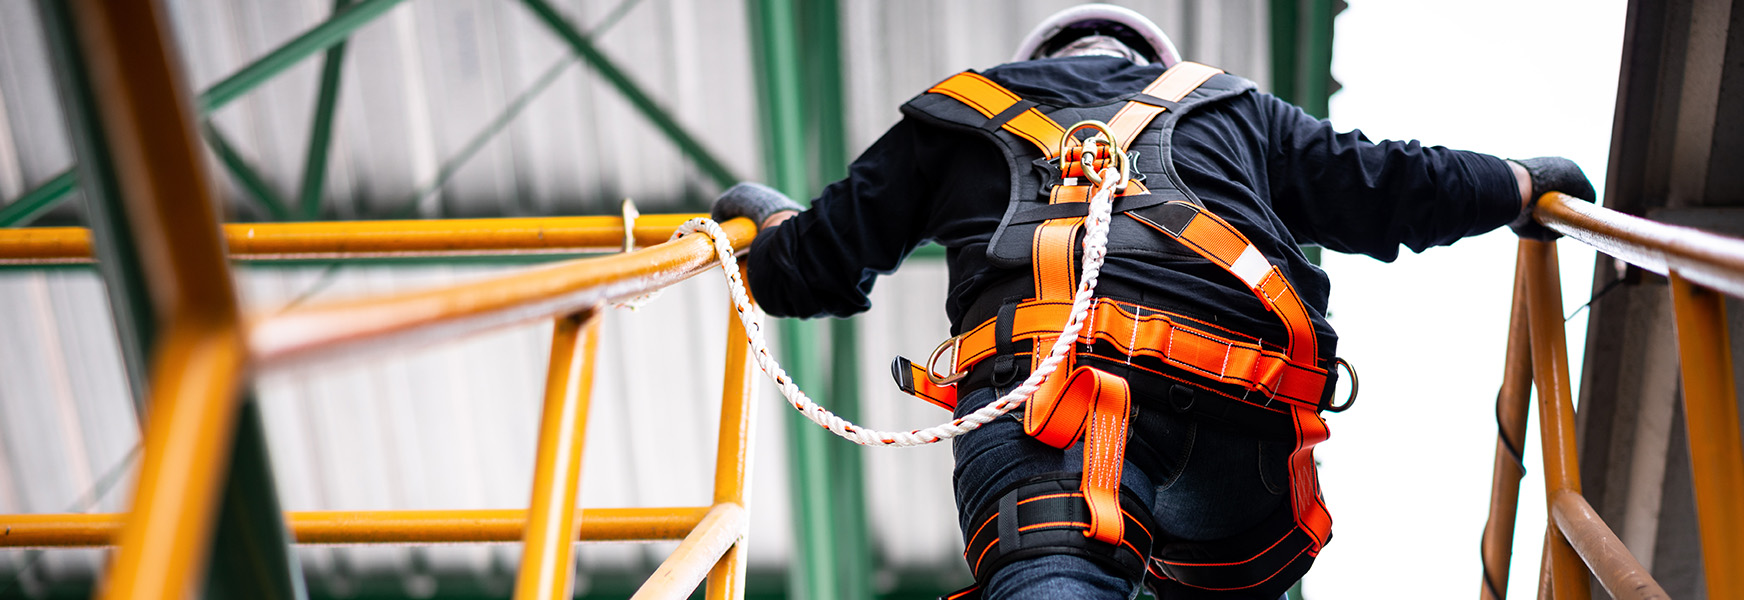 Worker climbing stairs with fall arrest harness attached